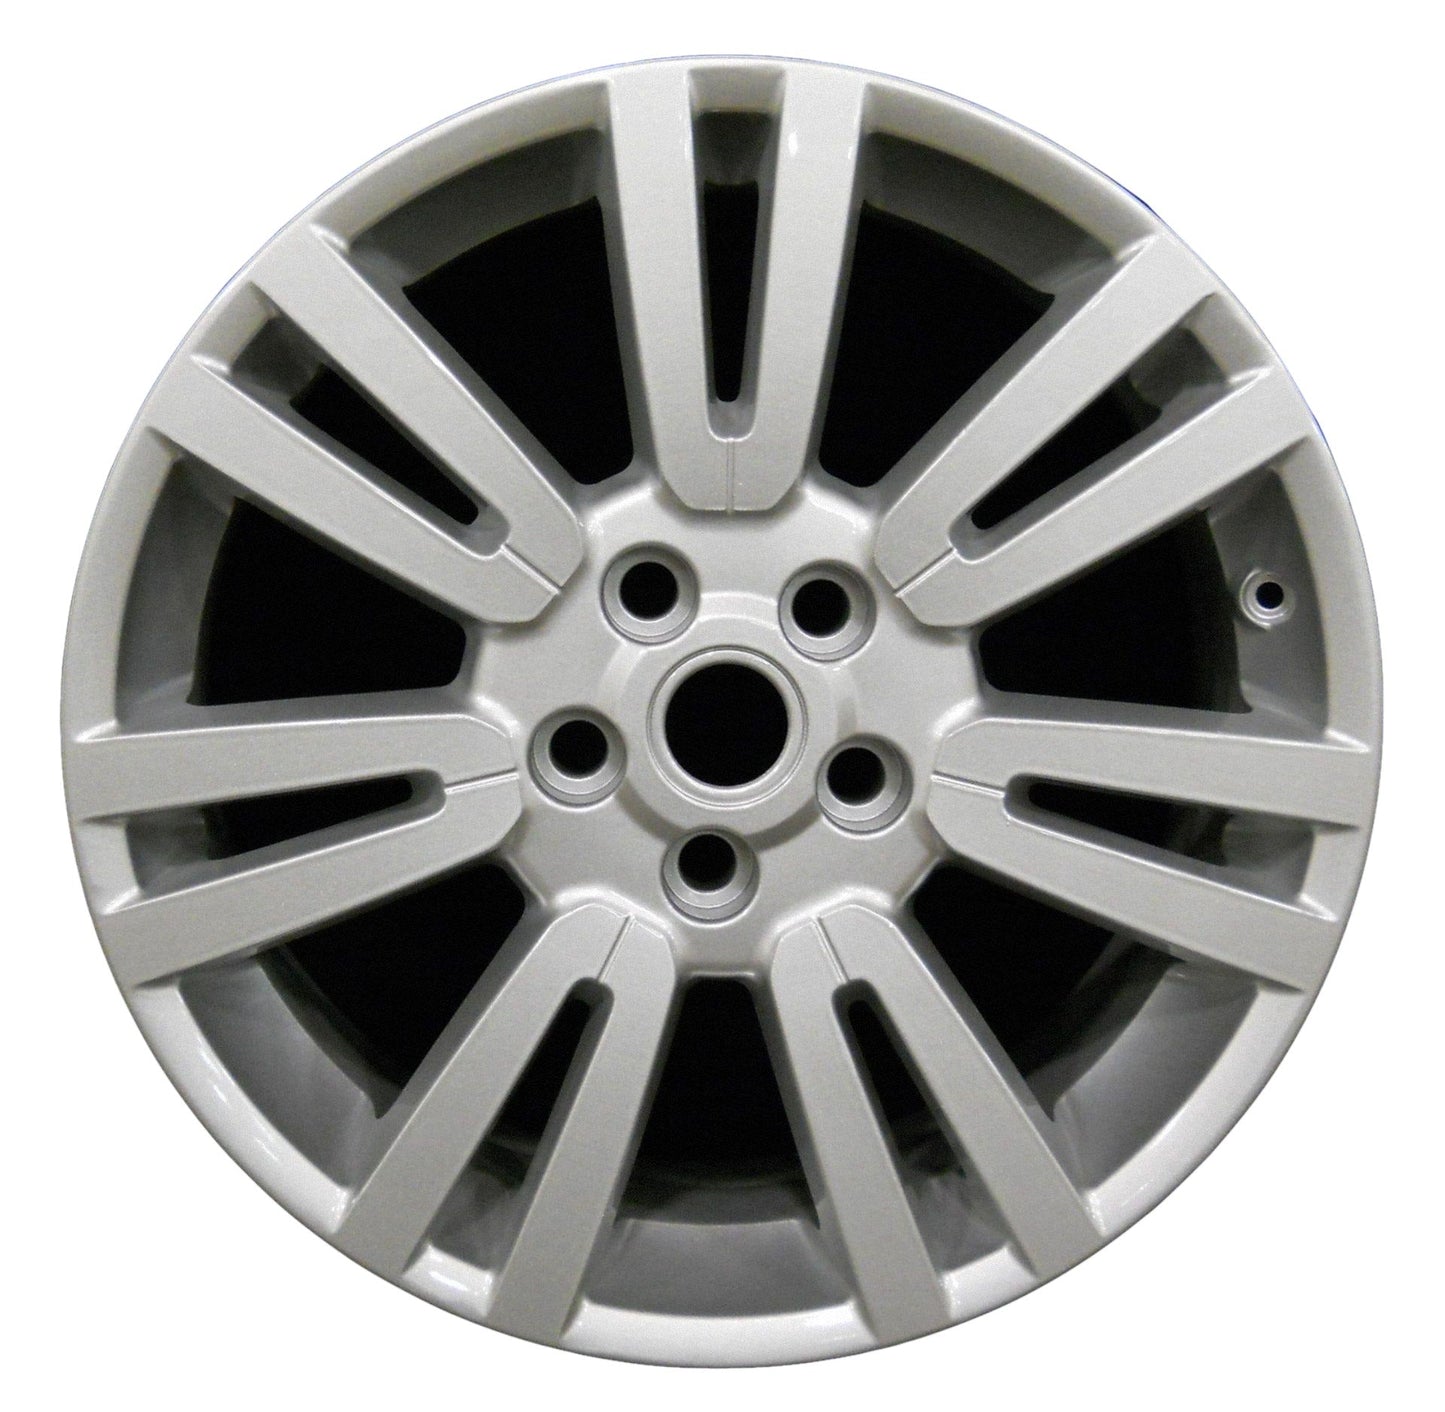 Land Rover LR4  2010, 2011, 2012, 2013, 2014, 2015 Factory OEM Car Wheel Size 19x8 Alloy WAO.72215.PS02.FF